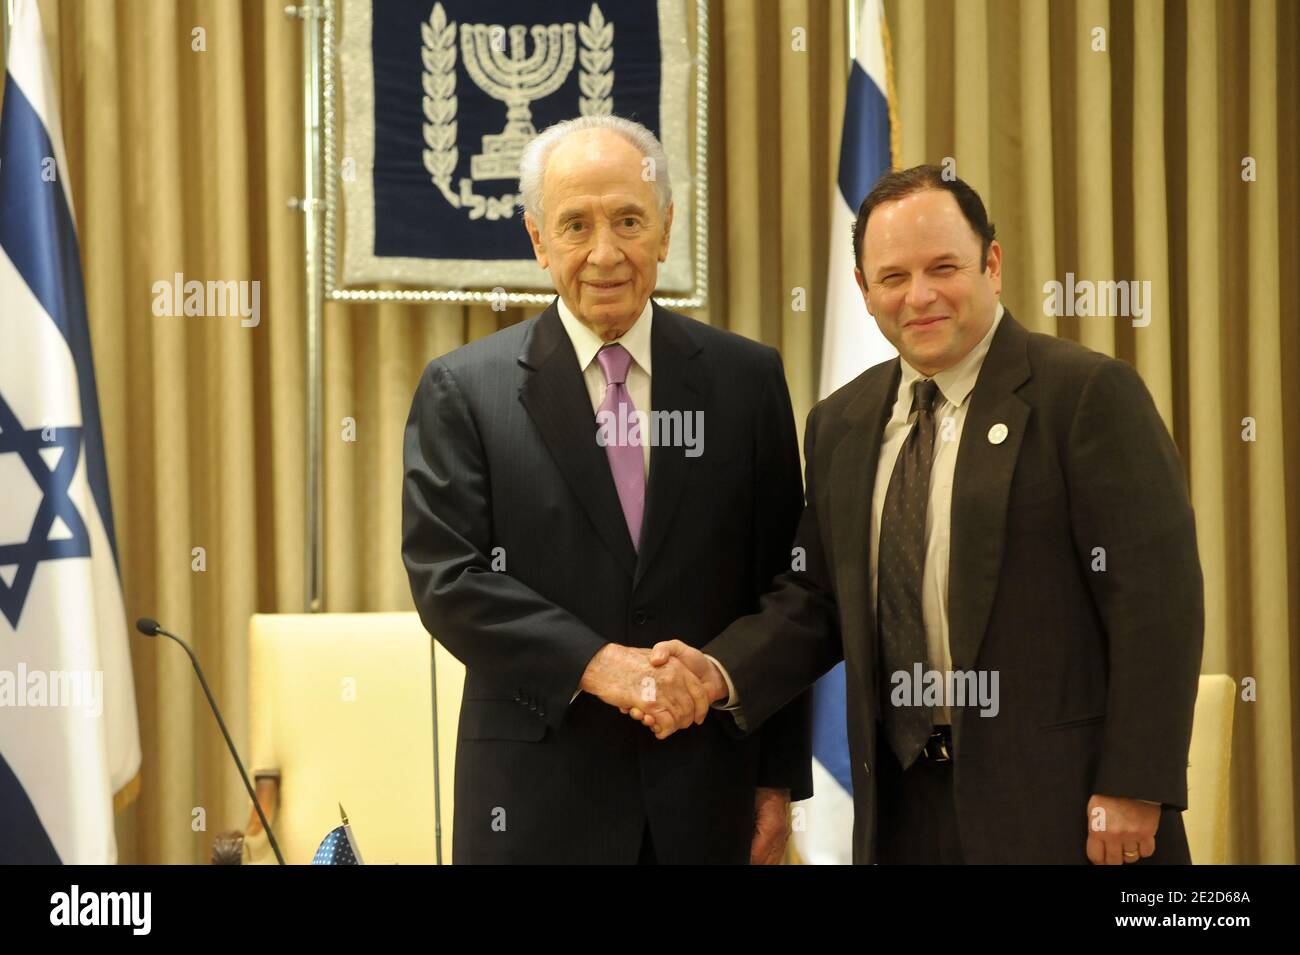 The President of the State of Israel, Shimon Peres, hosts in his residence  in Jerusalem the american actor Jason Alexander, better known as George  Costanza for his role on the hit television